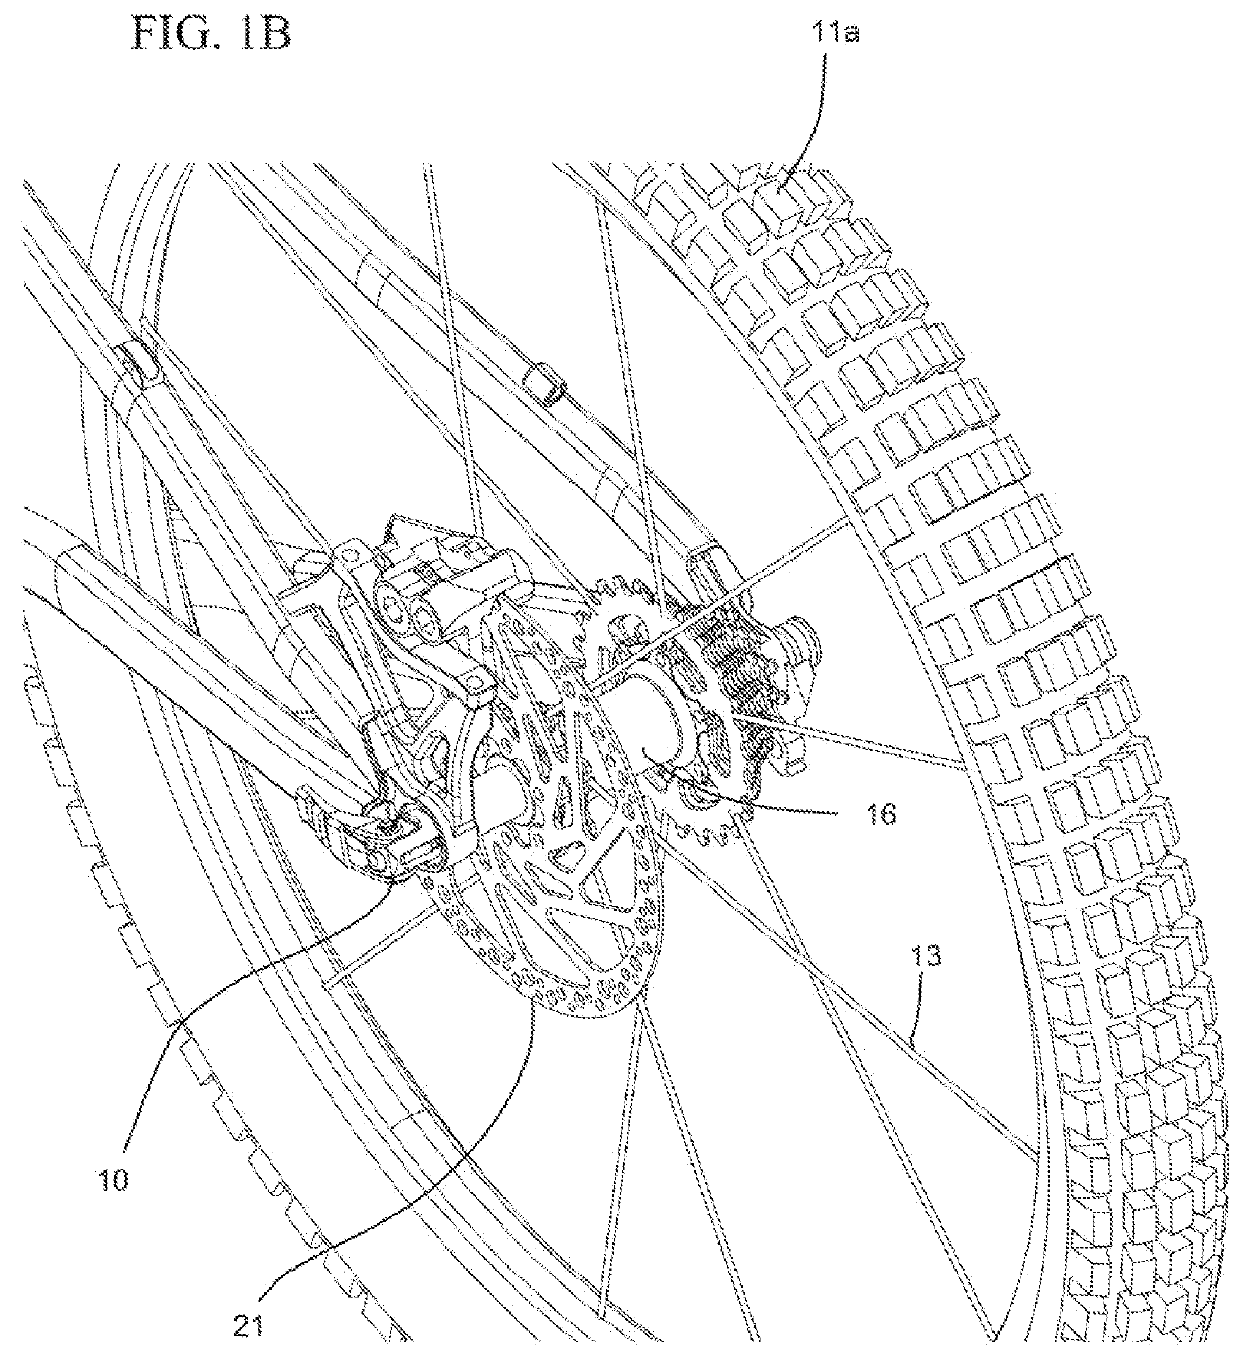 Bicycle tensioning device